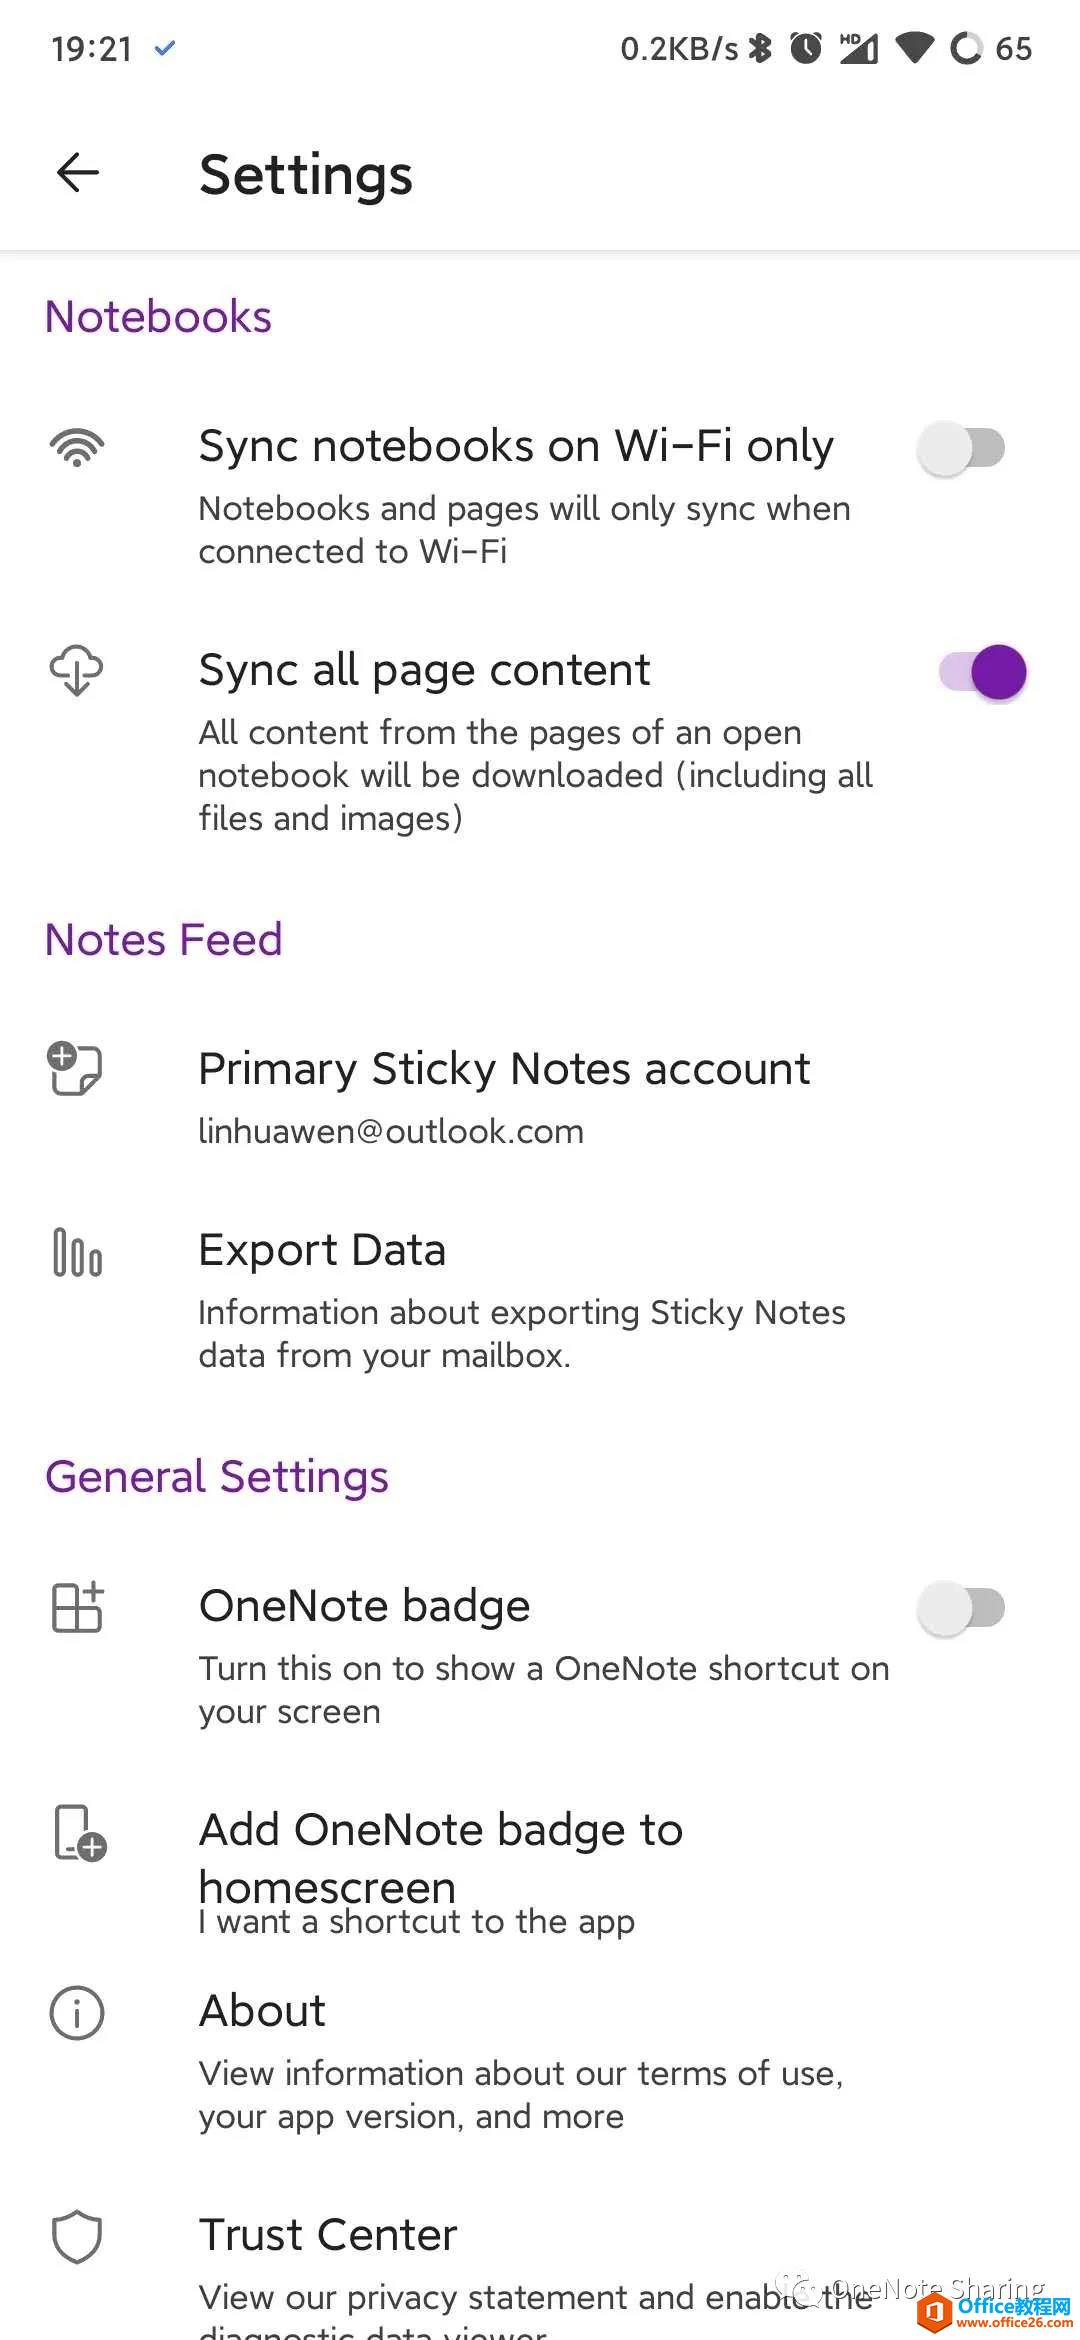 OneNote for Android UI界面大改！默认主页Feed时间线4